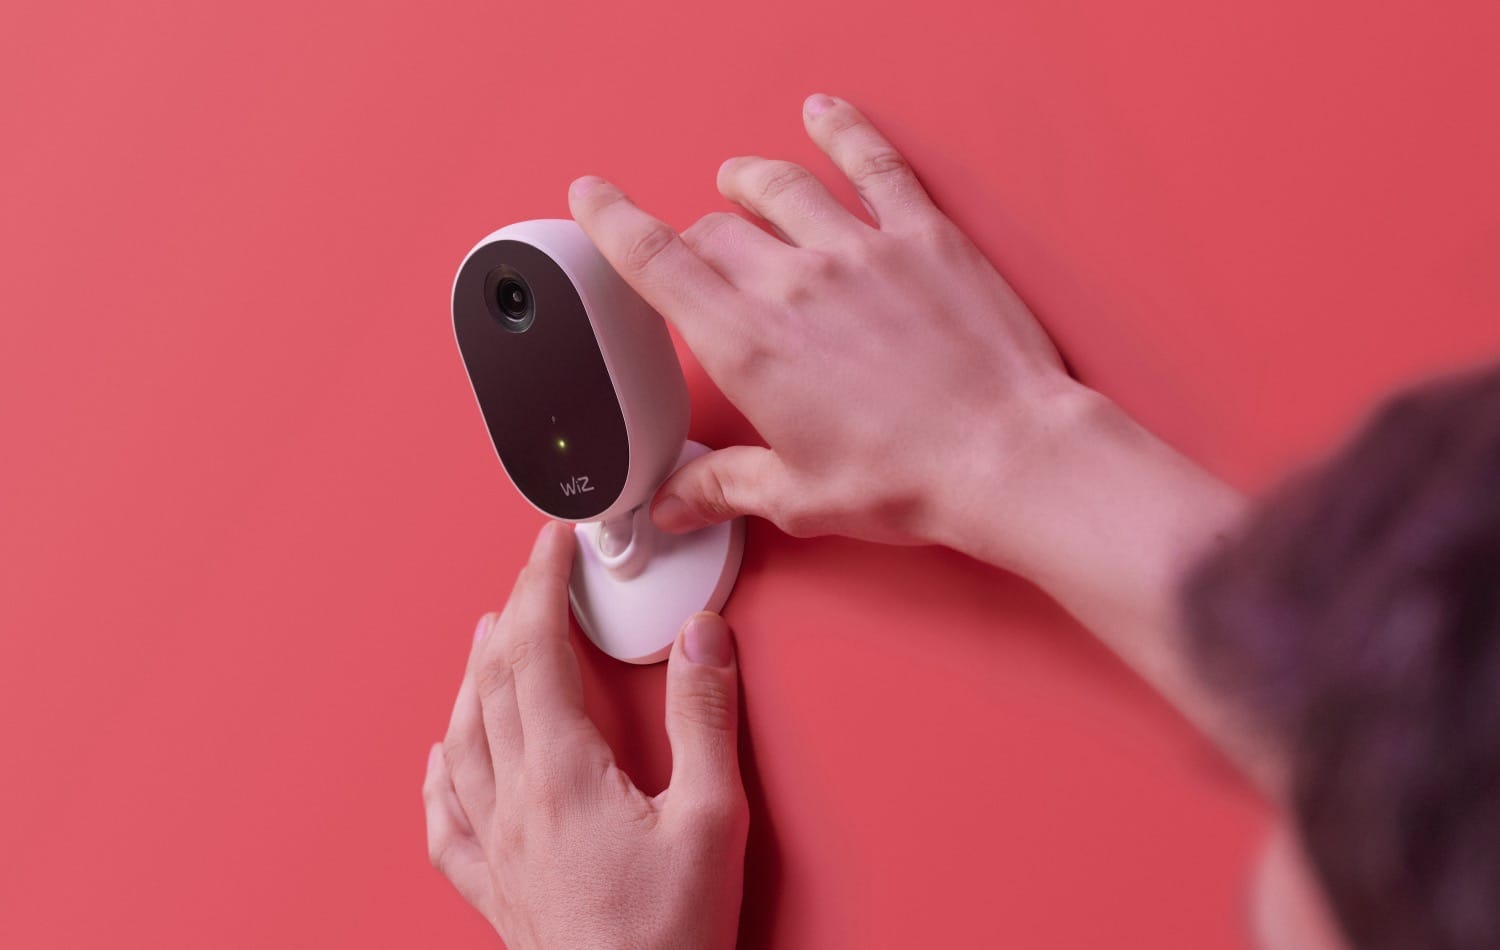 Hueblog: Why Philips Hue will have success with the cameras